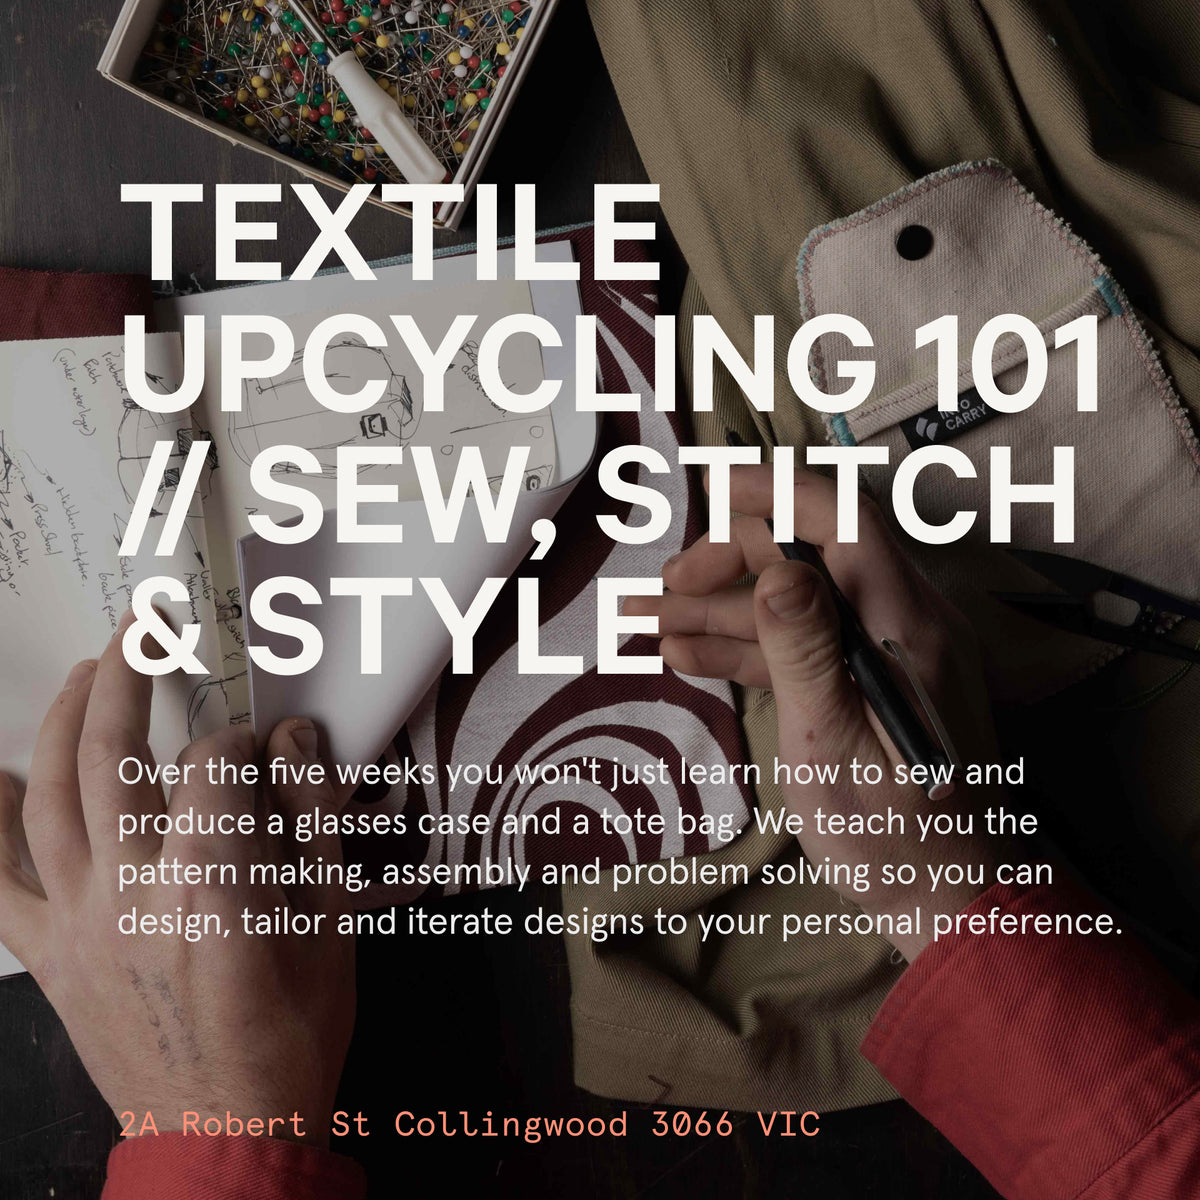 TEXTILE UPCYCLING 101 // Bring life back to existing textiles.